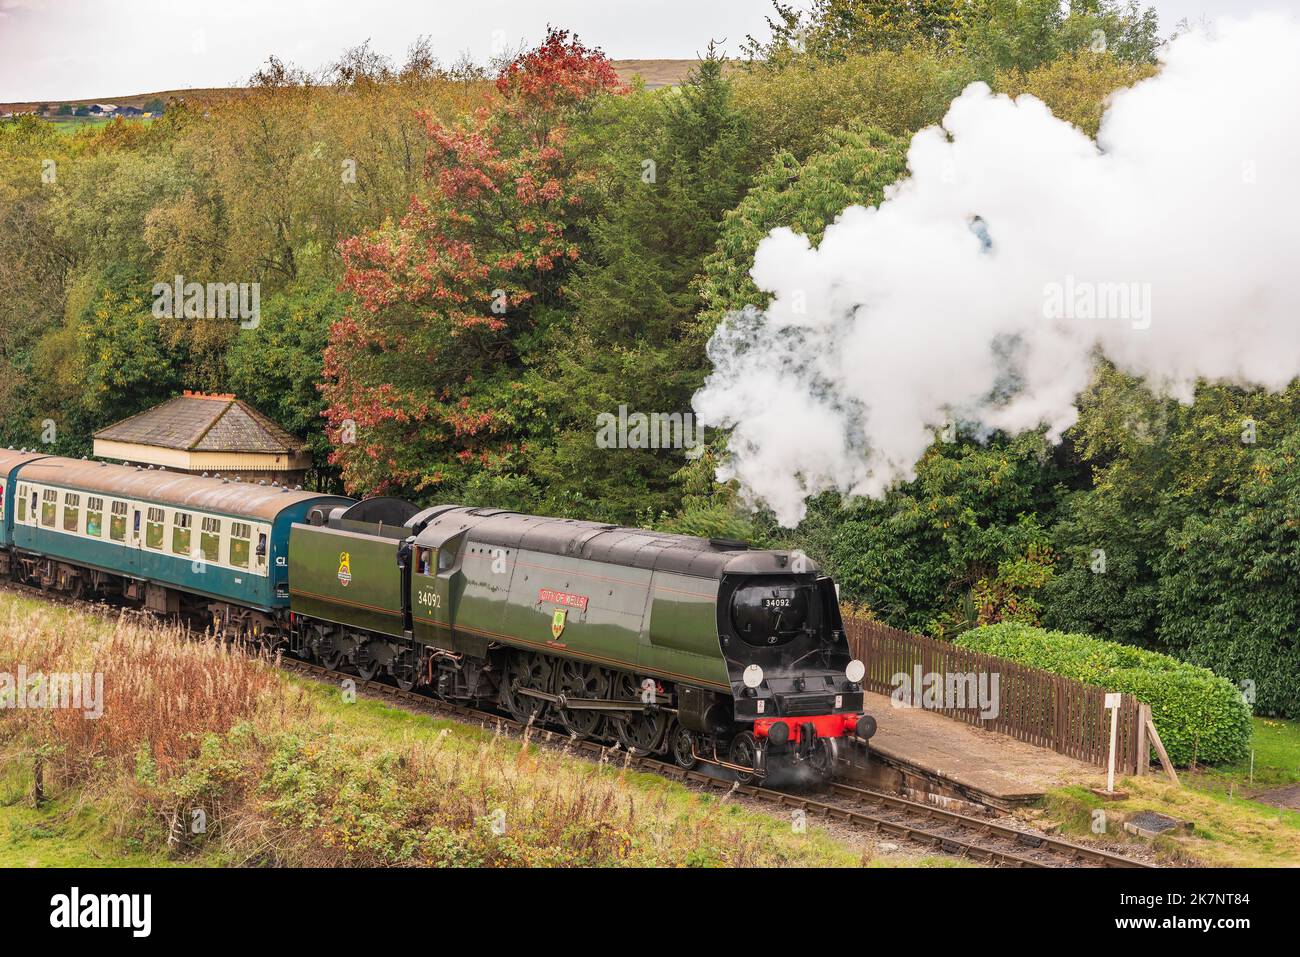 The City of Wells steam locomotive at Irwell Vale Halt durring the autumn steam gala on the East lancashire railway celebrating the Lancs and Yorkshir Stock Photo